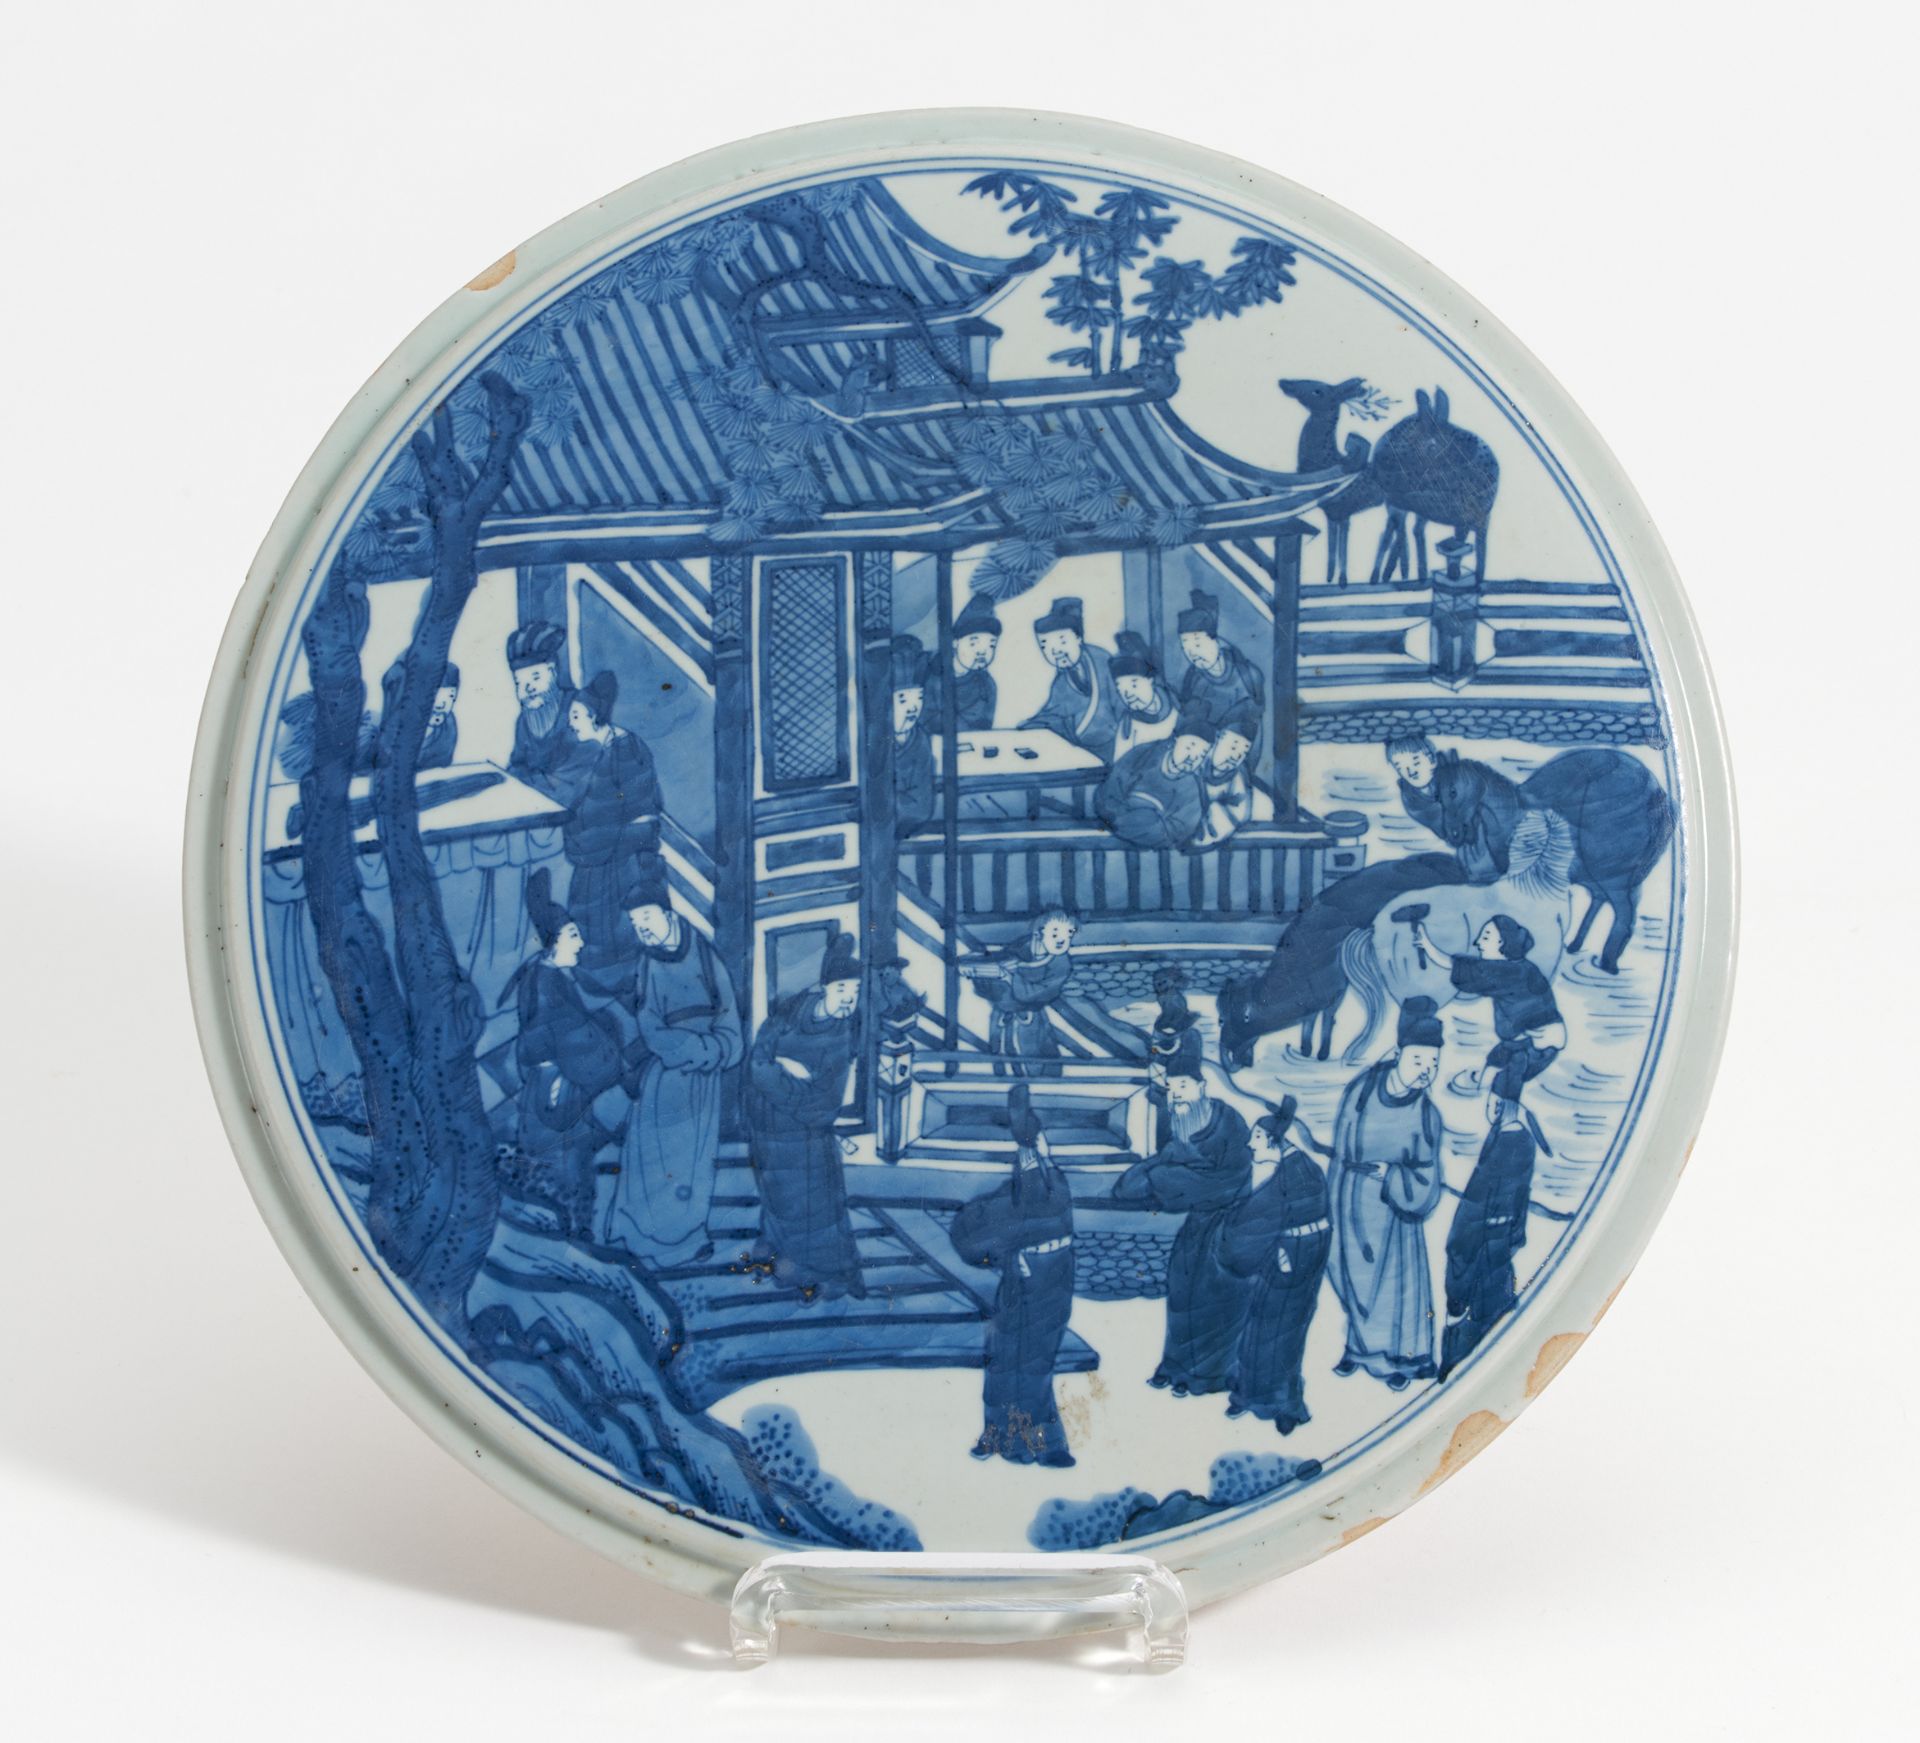 ROUND PLATE WITH SCHOLARS. China. 19th/20th c. Porcelain, painted underglaze blue. Set off rim. Back